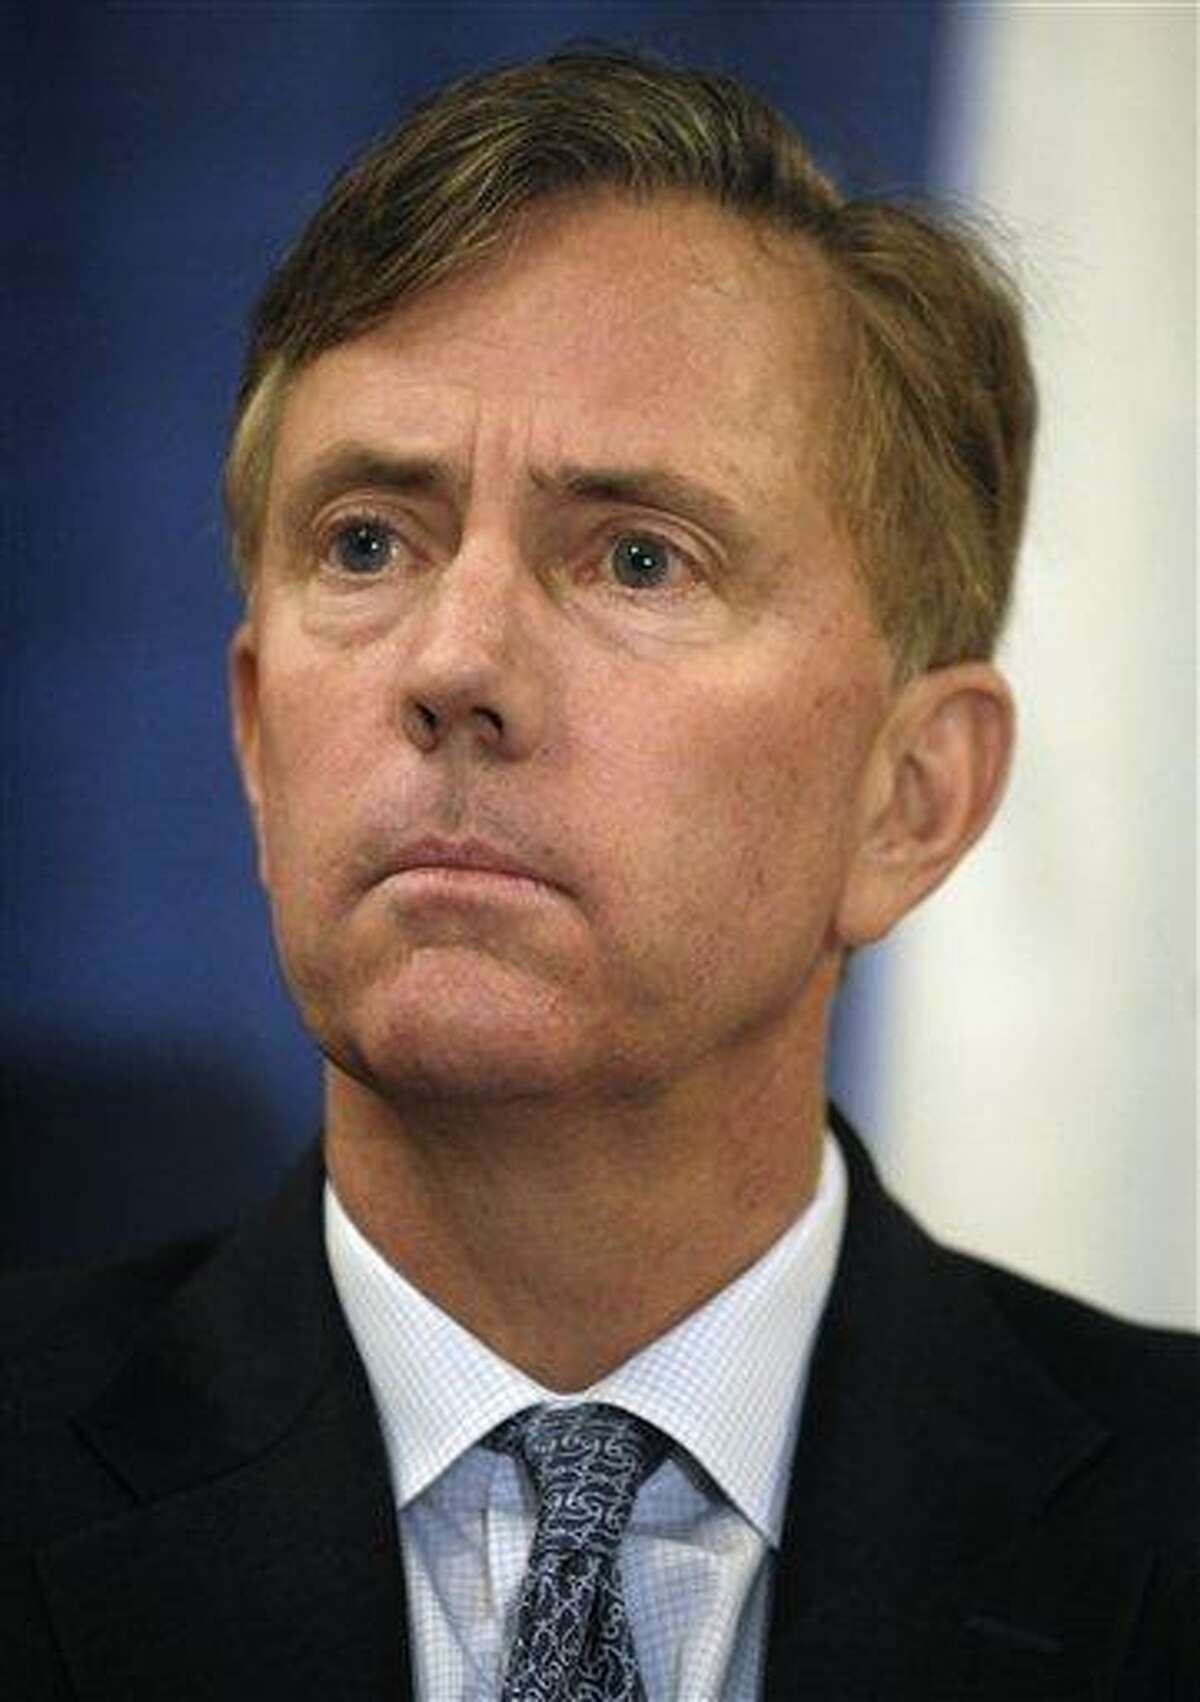 FILE - In this Jan. 20, 2010 file photo, Ned Lamont, listens to speakers at a bipartisan forum in Cromwell, Conn. Lamont, the political upstart who challenged U.S. Sen. Joe Lieberman four years ago, is expected to announce his bid for governor Tuesday, Feb. 16, 2010 at the Old State House in Hartford. (AP Photo/Jessica Hill, File)